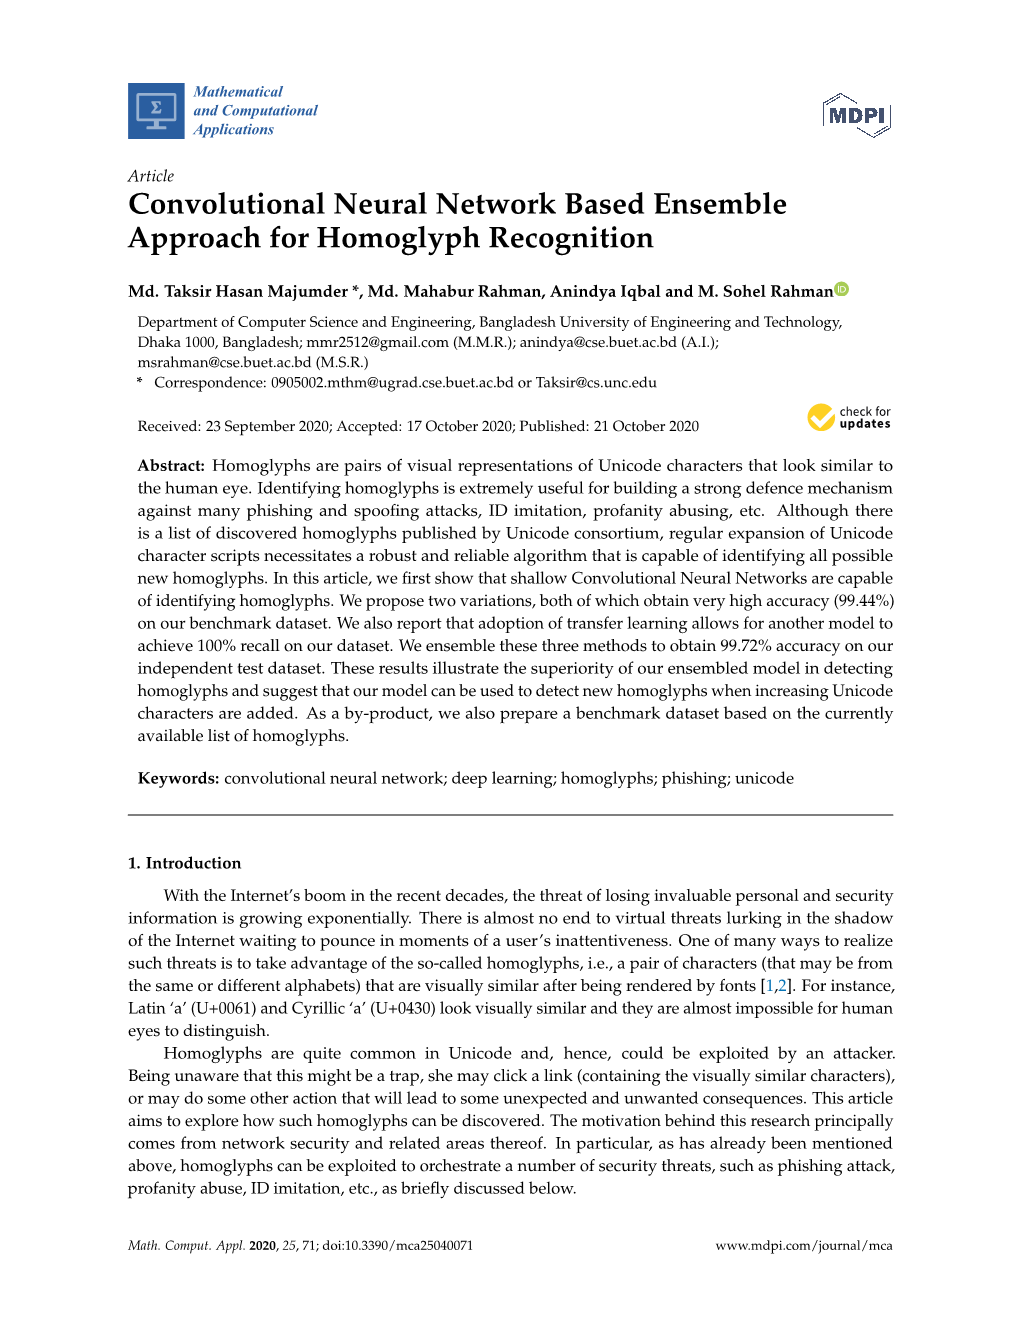 Convolutional Neural Network Based Ensemble Approach for Homoglyph Recognition